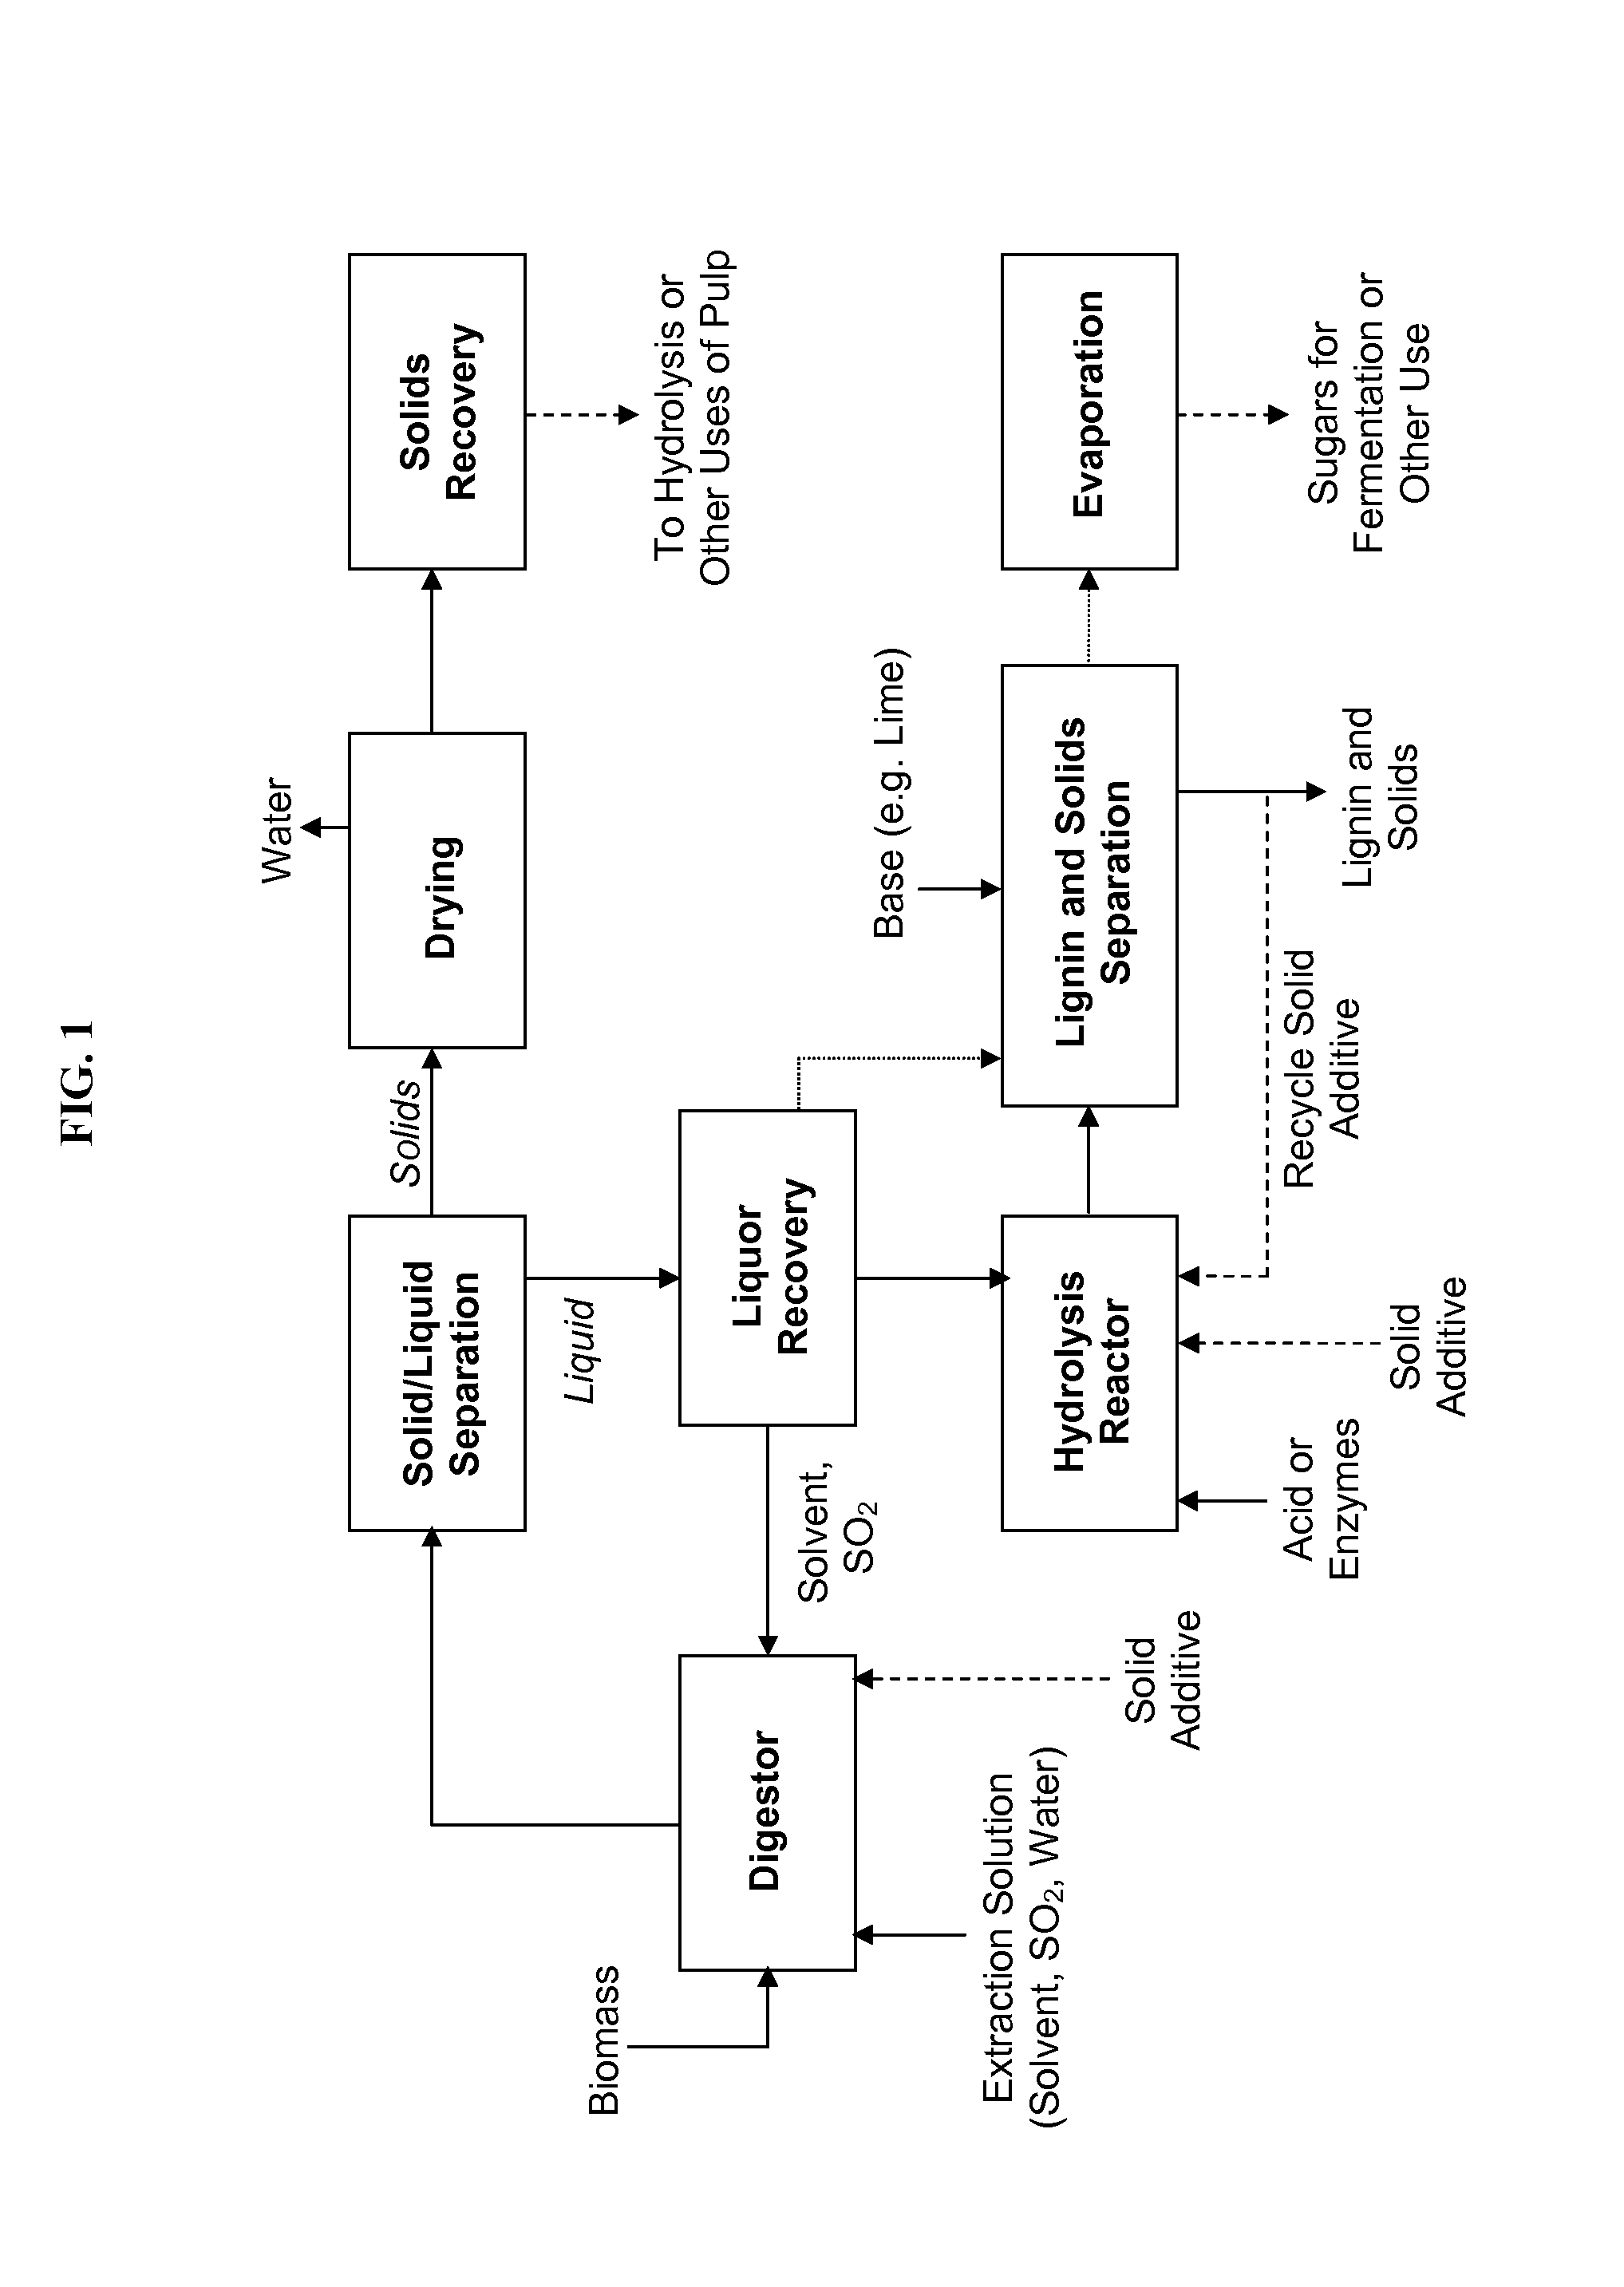 Processes and apparatus for lignin separation in biorefineries